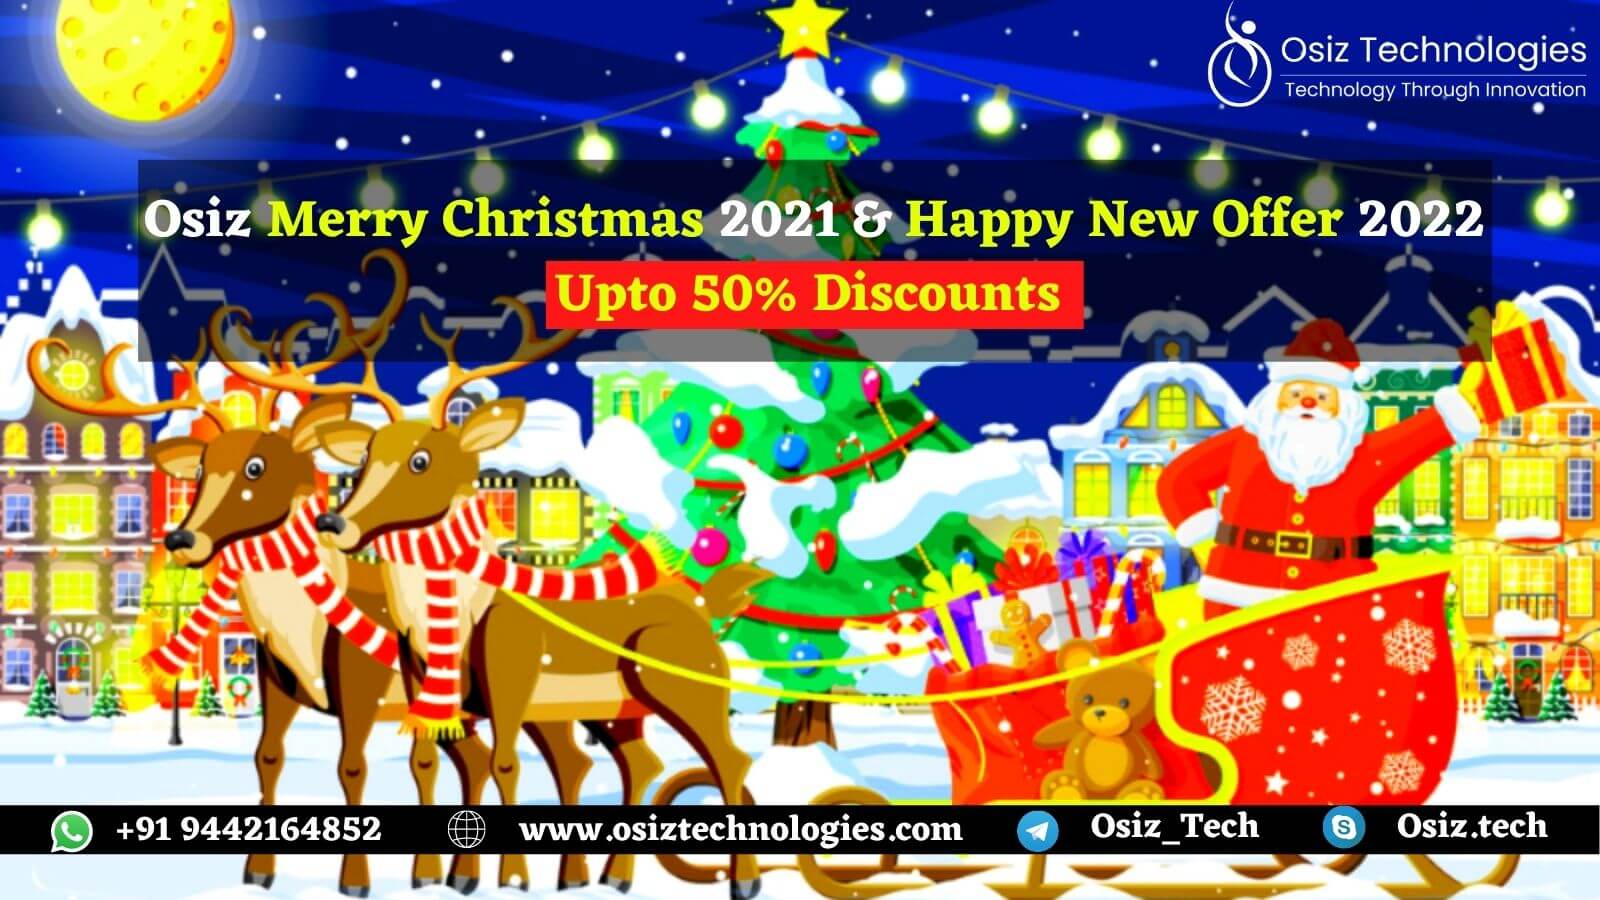 Incredible Christmas 2021 & Happy New Year 2022 Offer! Grab Upto 50% OFF From Us!  